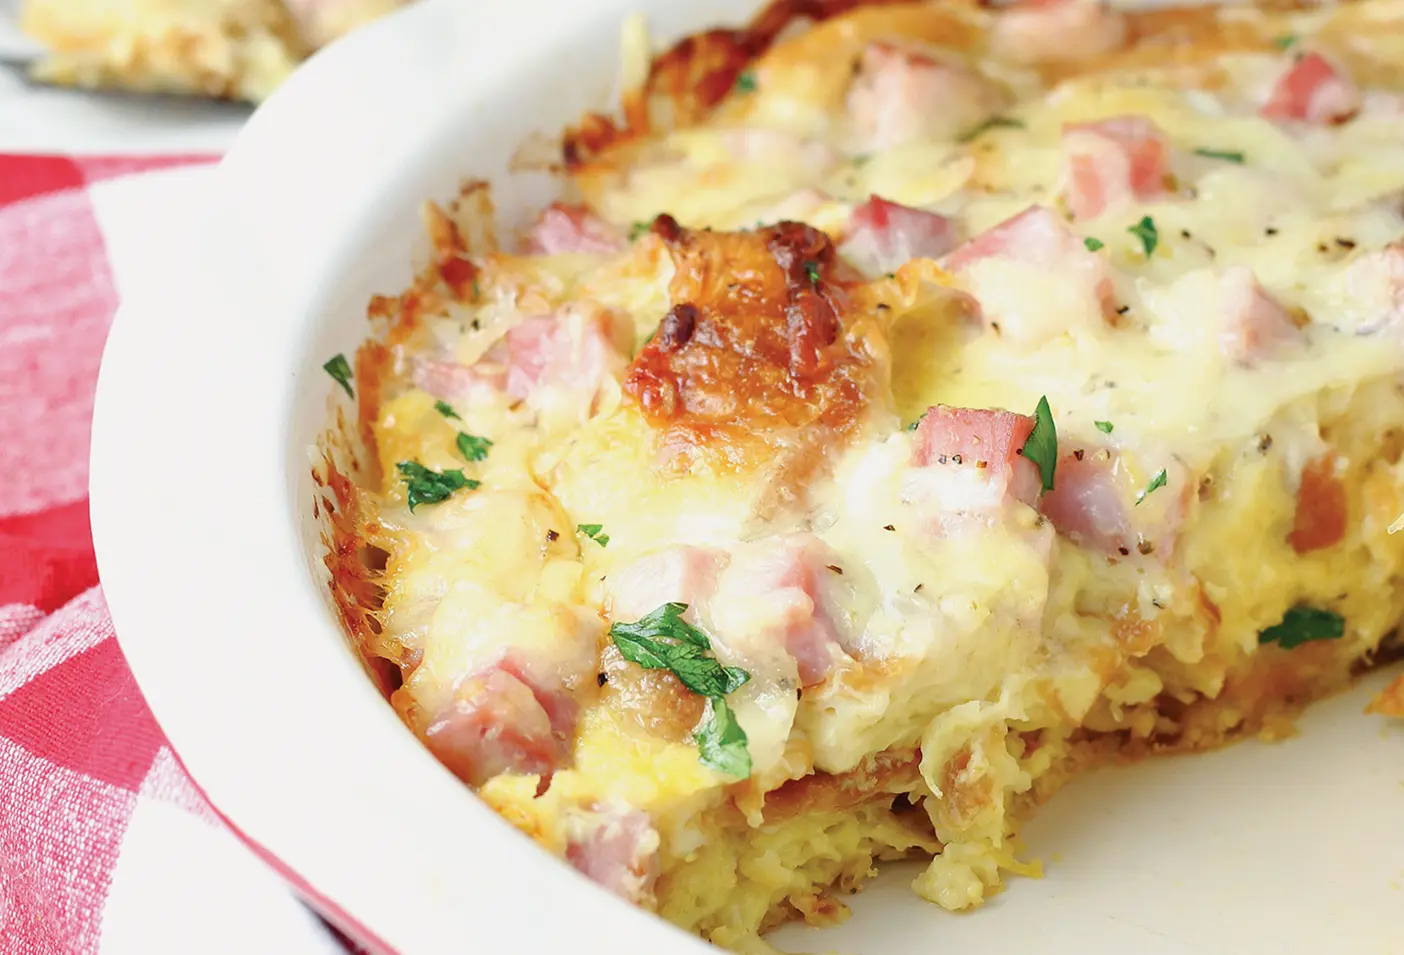 A combination of ham, cheese, eggs, and other ingredients sits freshly baked in a white bowl, cut in half.